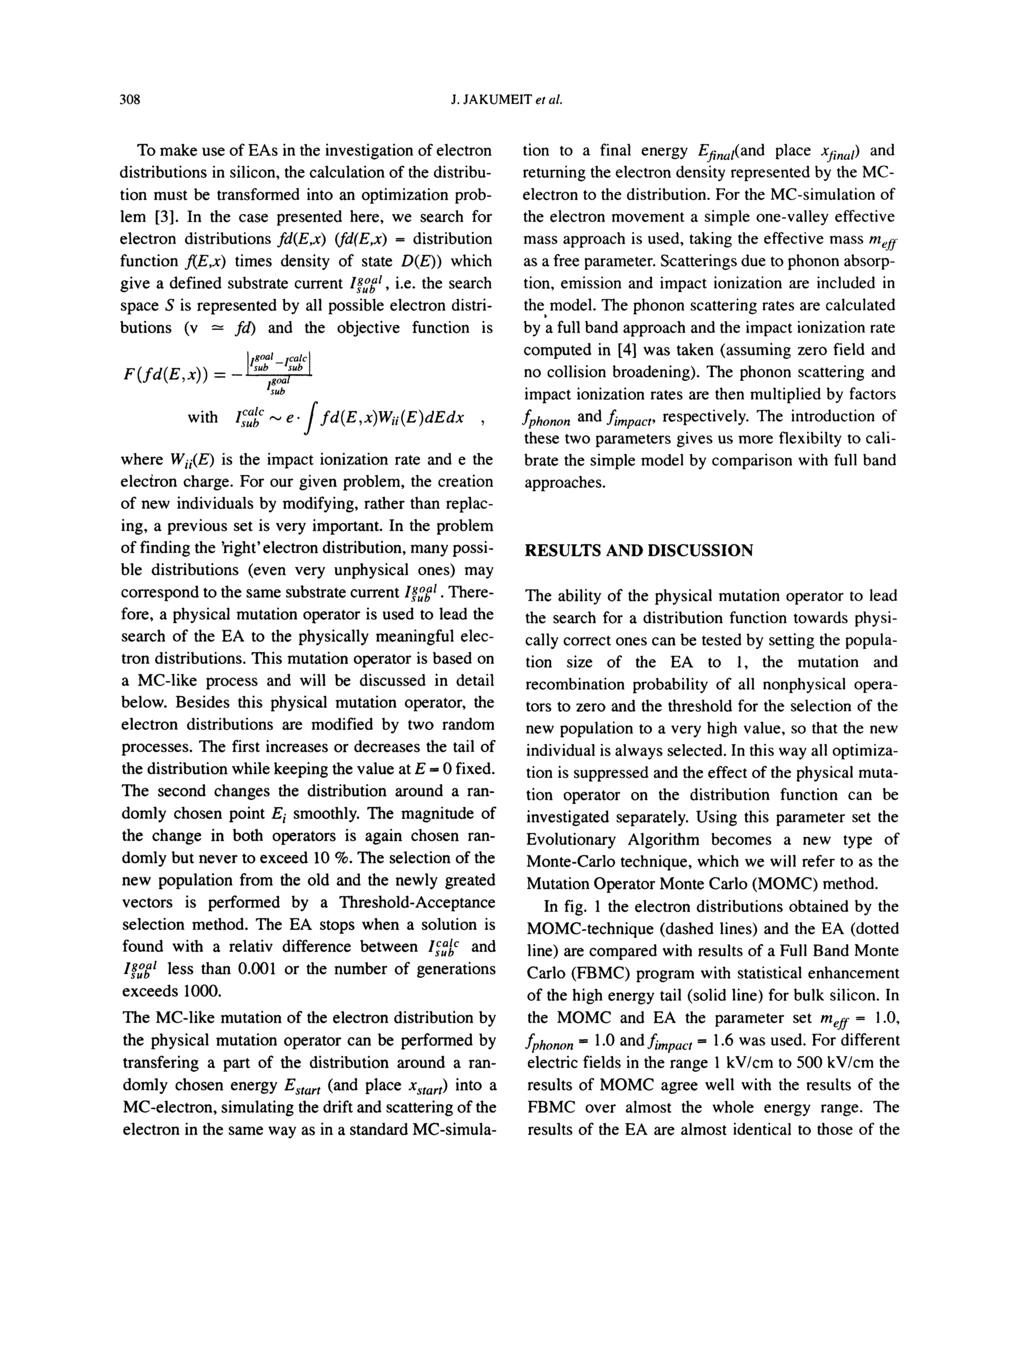 308 J. JAKUMEIT et al. To make use of EAs in the investigation of electron distributions in silicon, the calculation of the distribution must be transformed into an optimization problem [3].